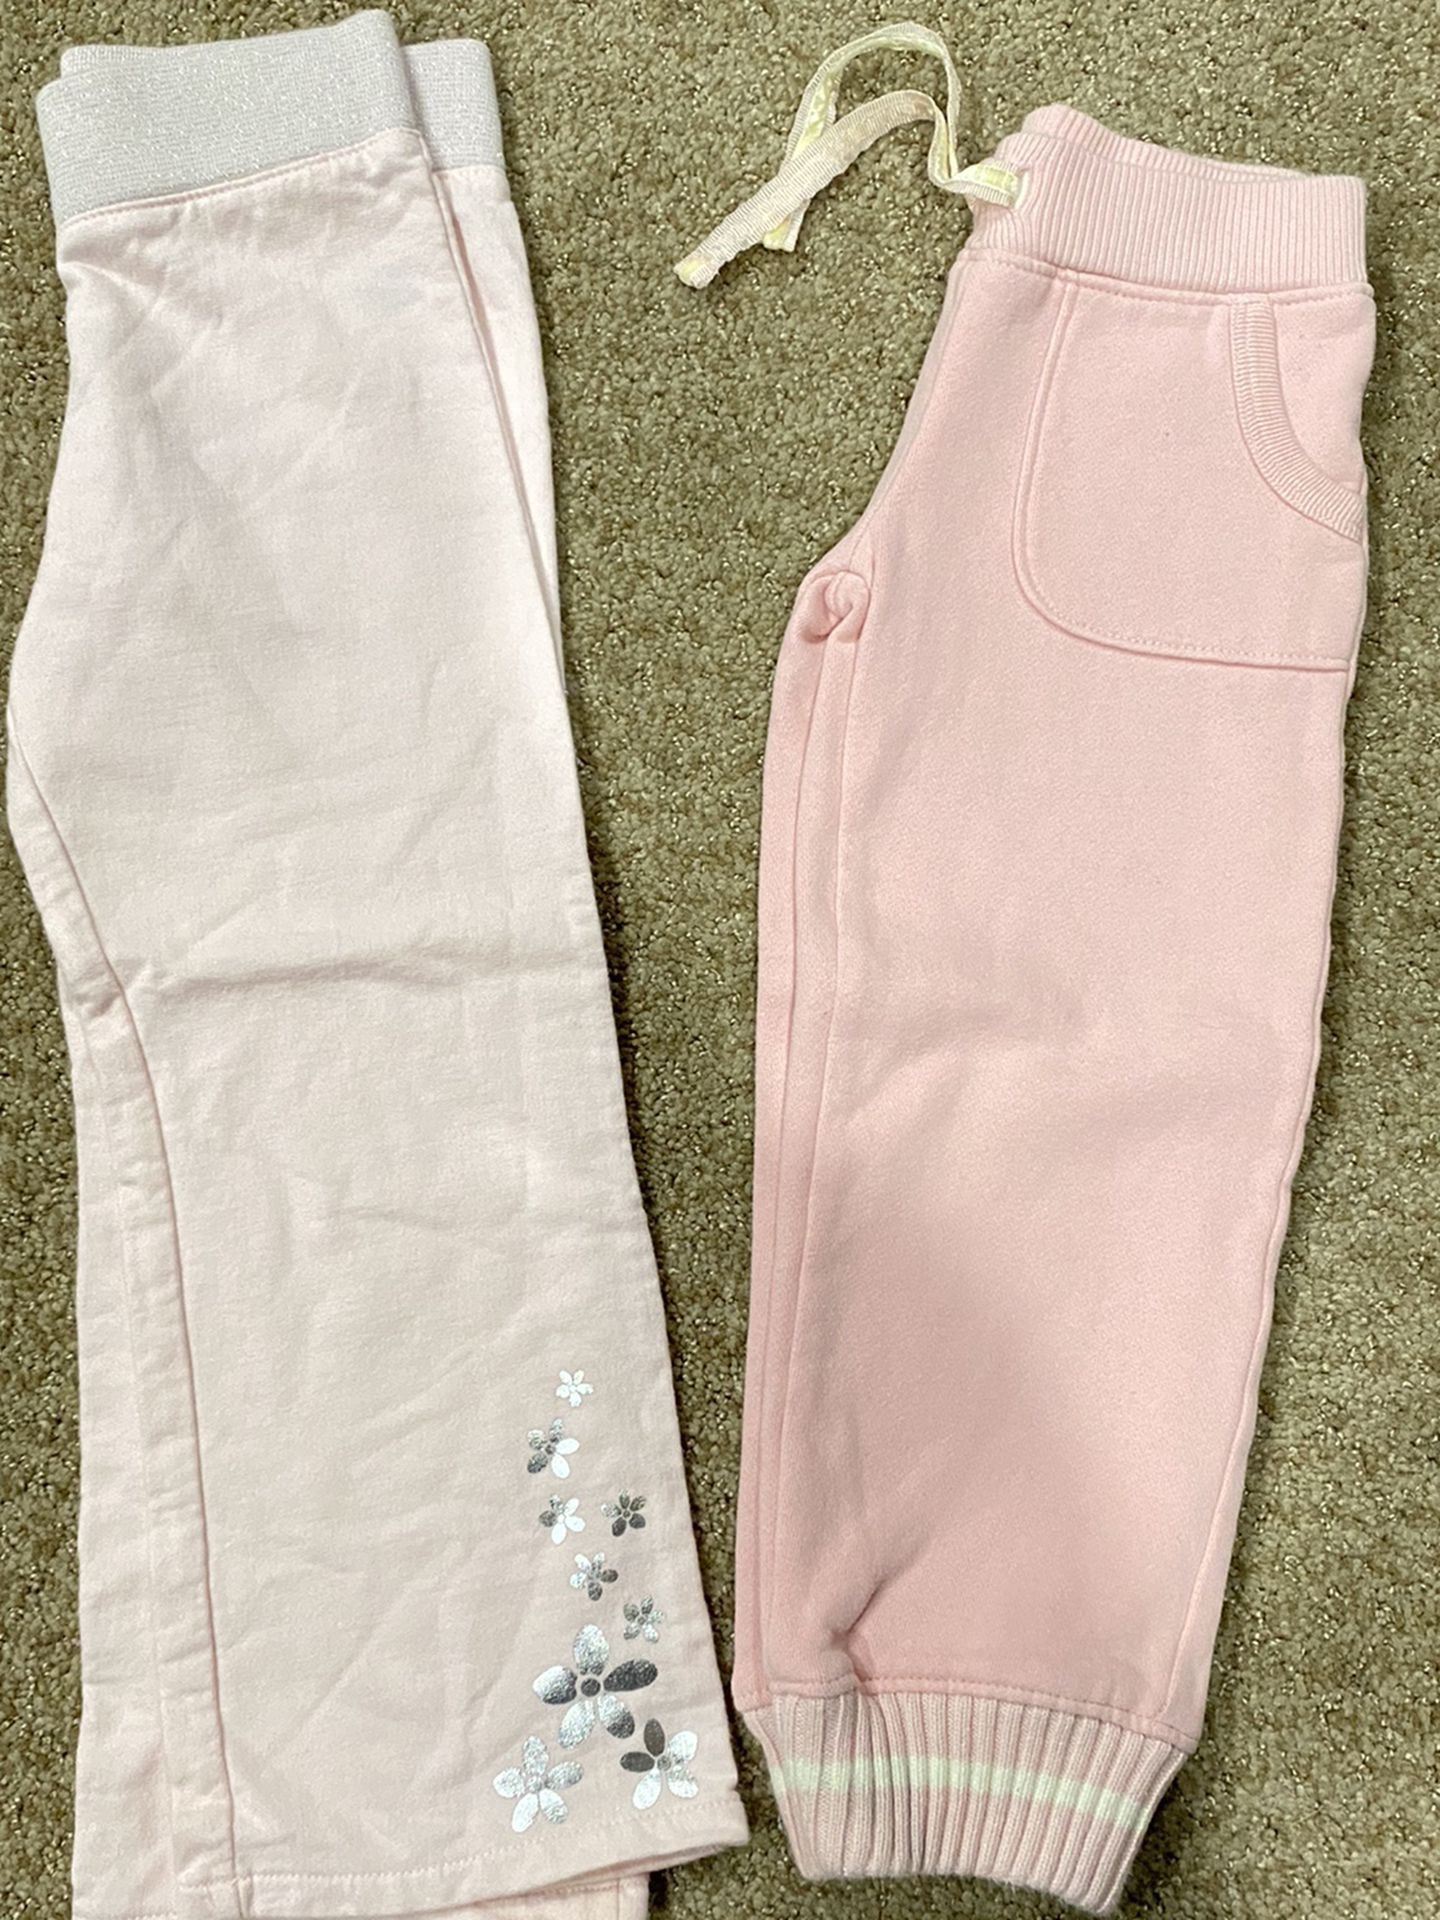 Girls Old Navy Pants Size 4t